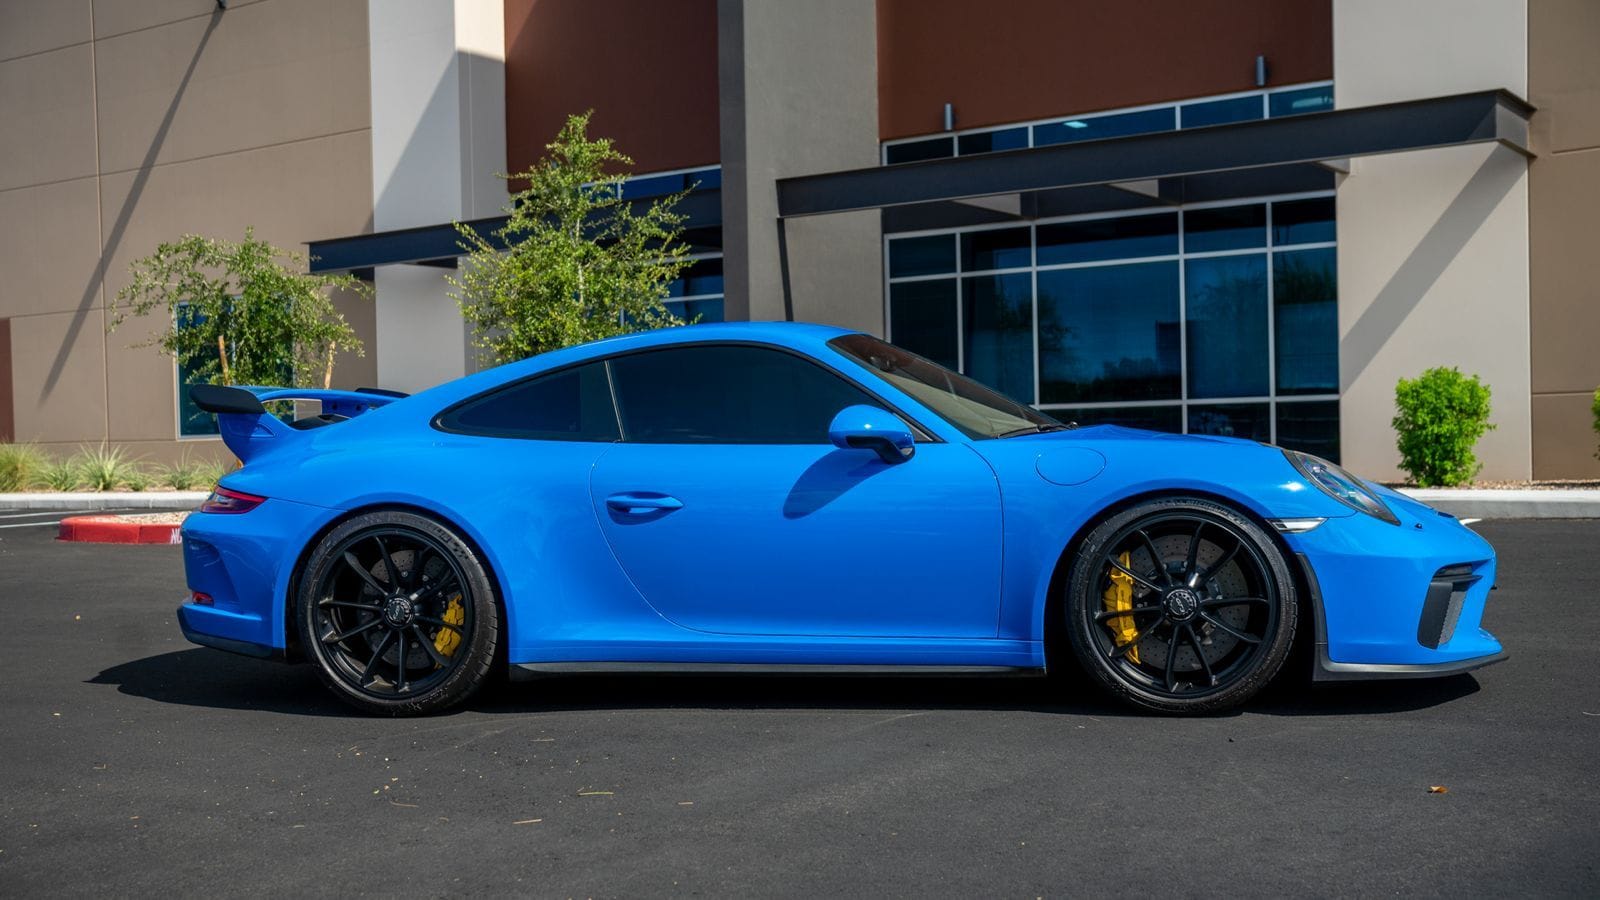 2018 Porsche GT3 - 991.2 Voodoo Blue GT3 - Used - VIN WP0AC2A94JS175121 - 17,316 Miles - 6 cyl - 2WD - Manual - Coupe - Blue - Gilbert, AZ 85233, United States